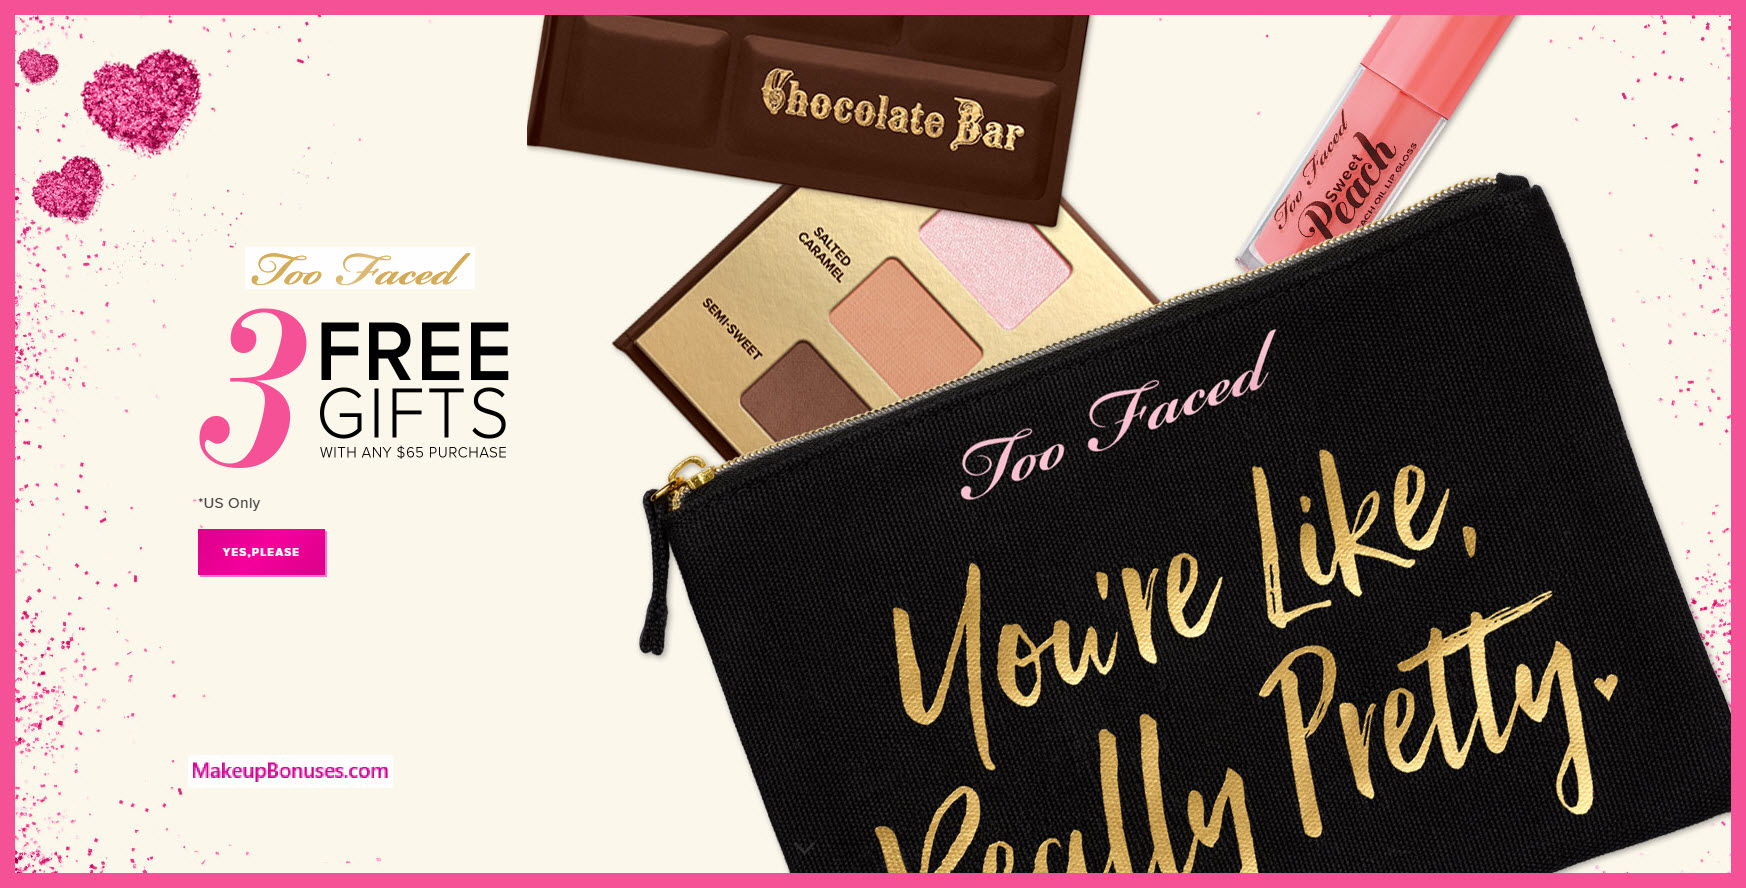 Receive a free 3-pc gift with your $65 Too Faced purchase